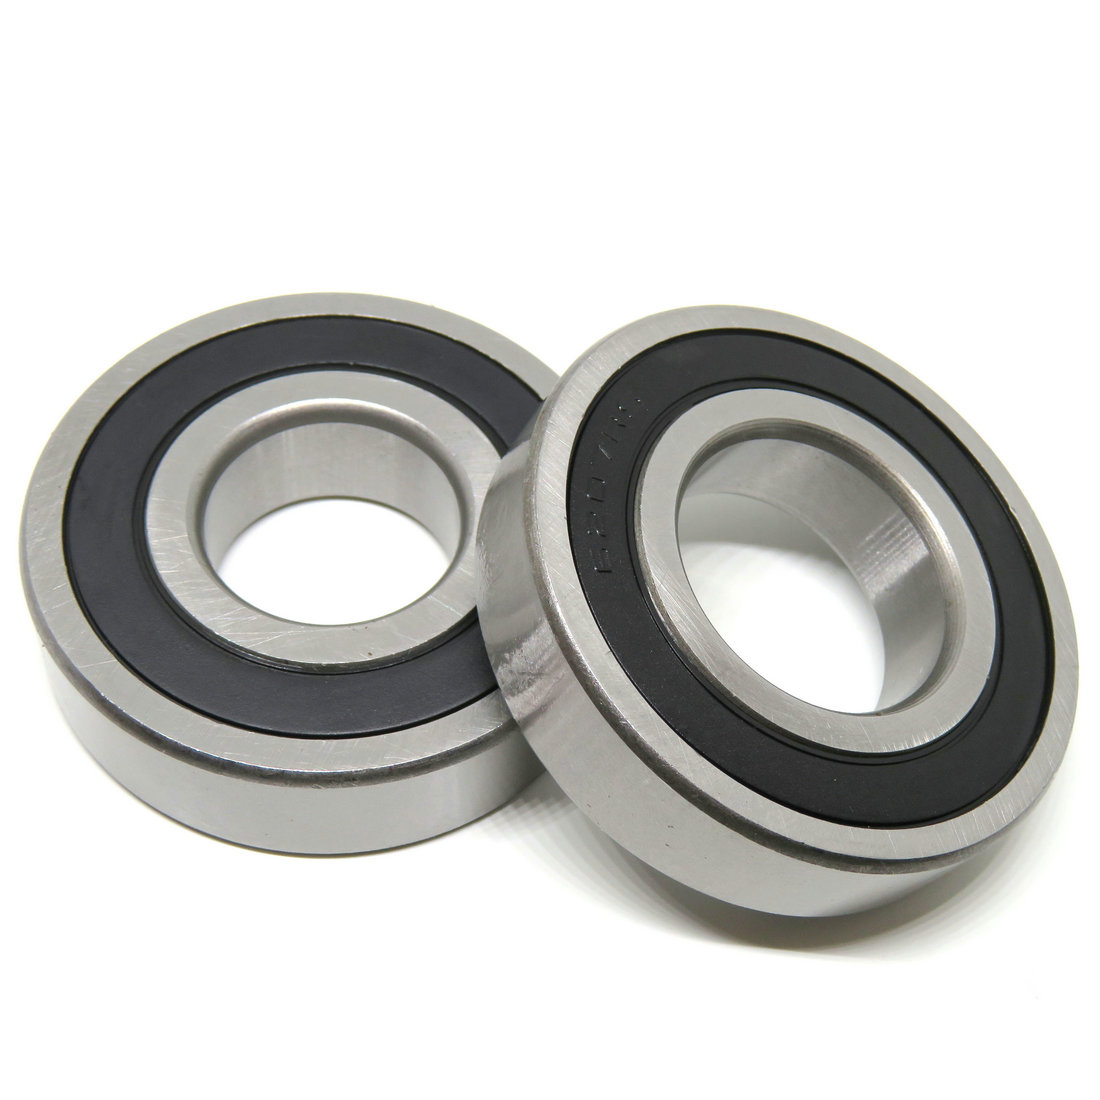 6008 Deep Groove Ball Bearings 40mm Bore 68mm OD 15mm Thick C3 Chrome Steel Rubber Seal Bearing.jpg